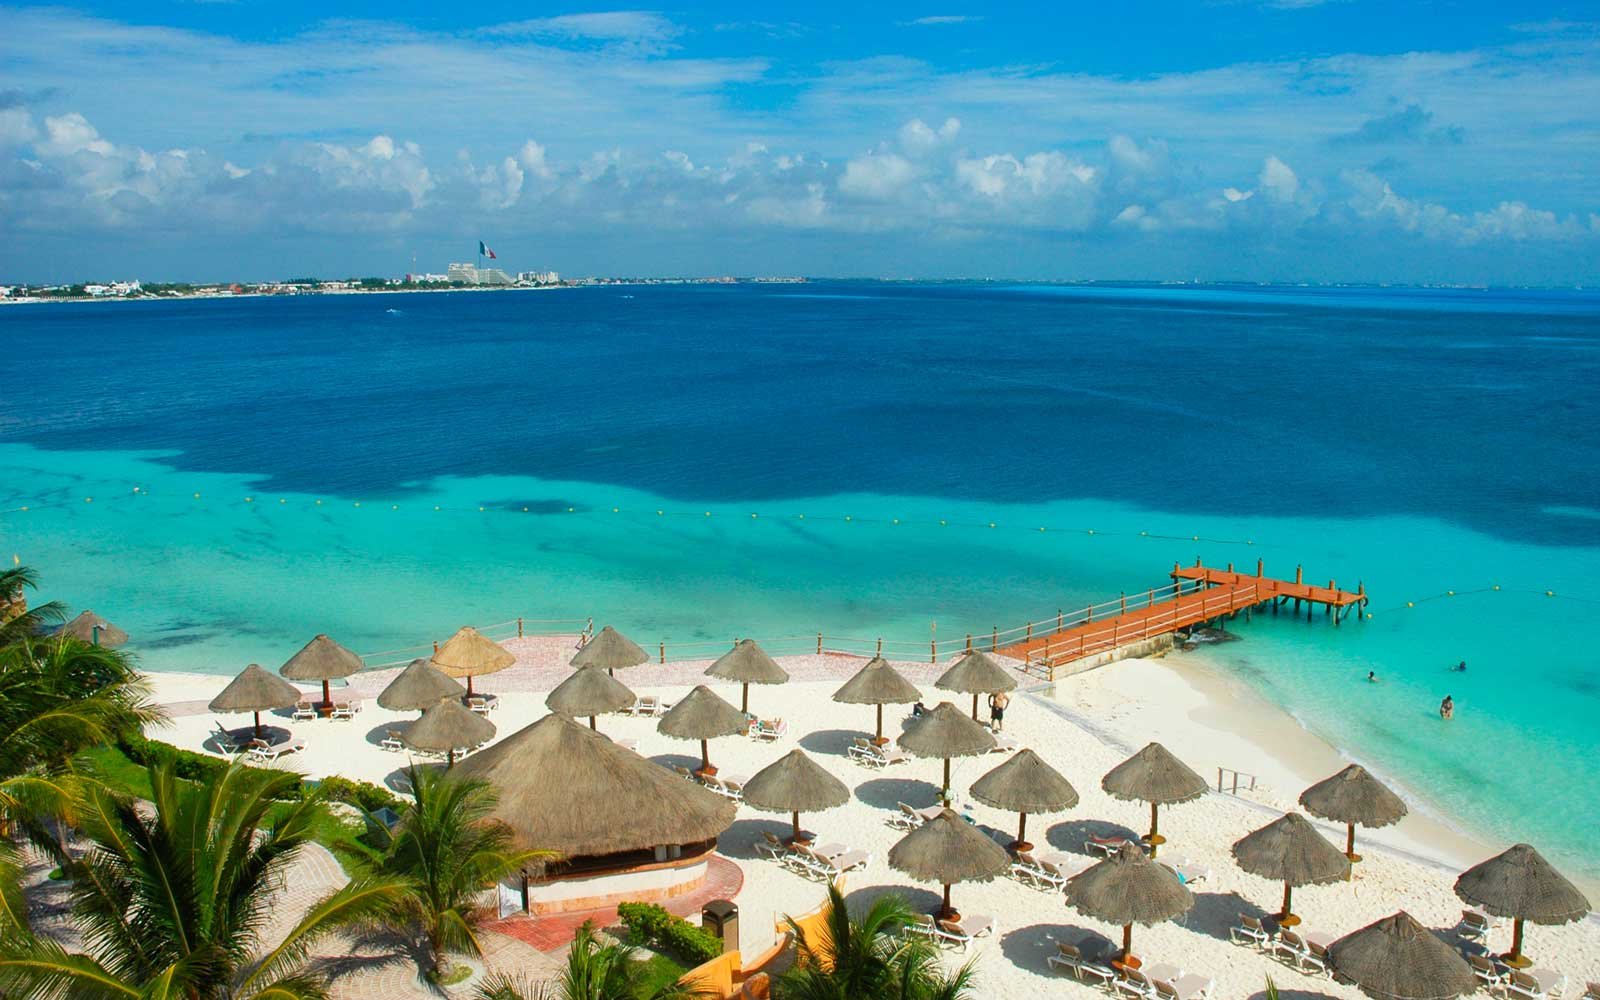 St Louis Missouri to Cancun Mexico $179 RT Airfares on American Airlines BE (Travel February - May 2022)